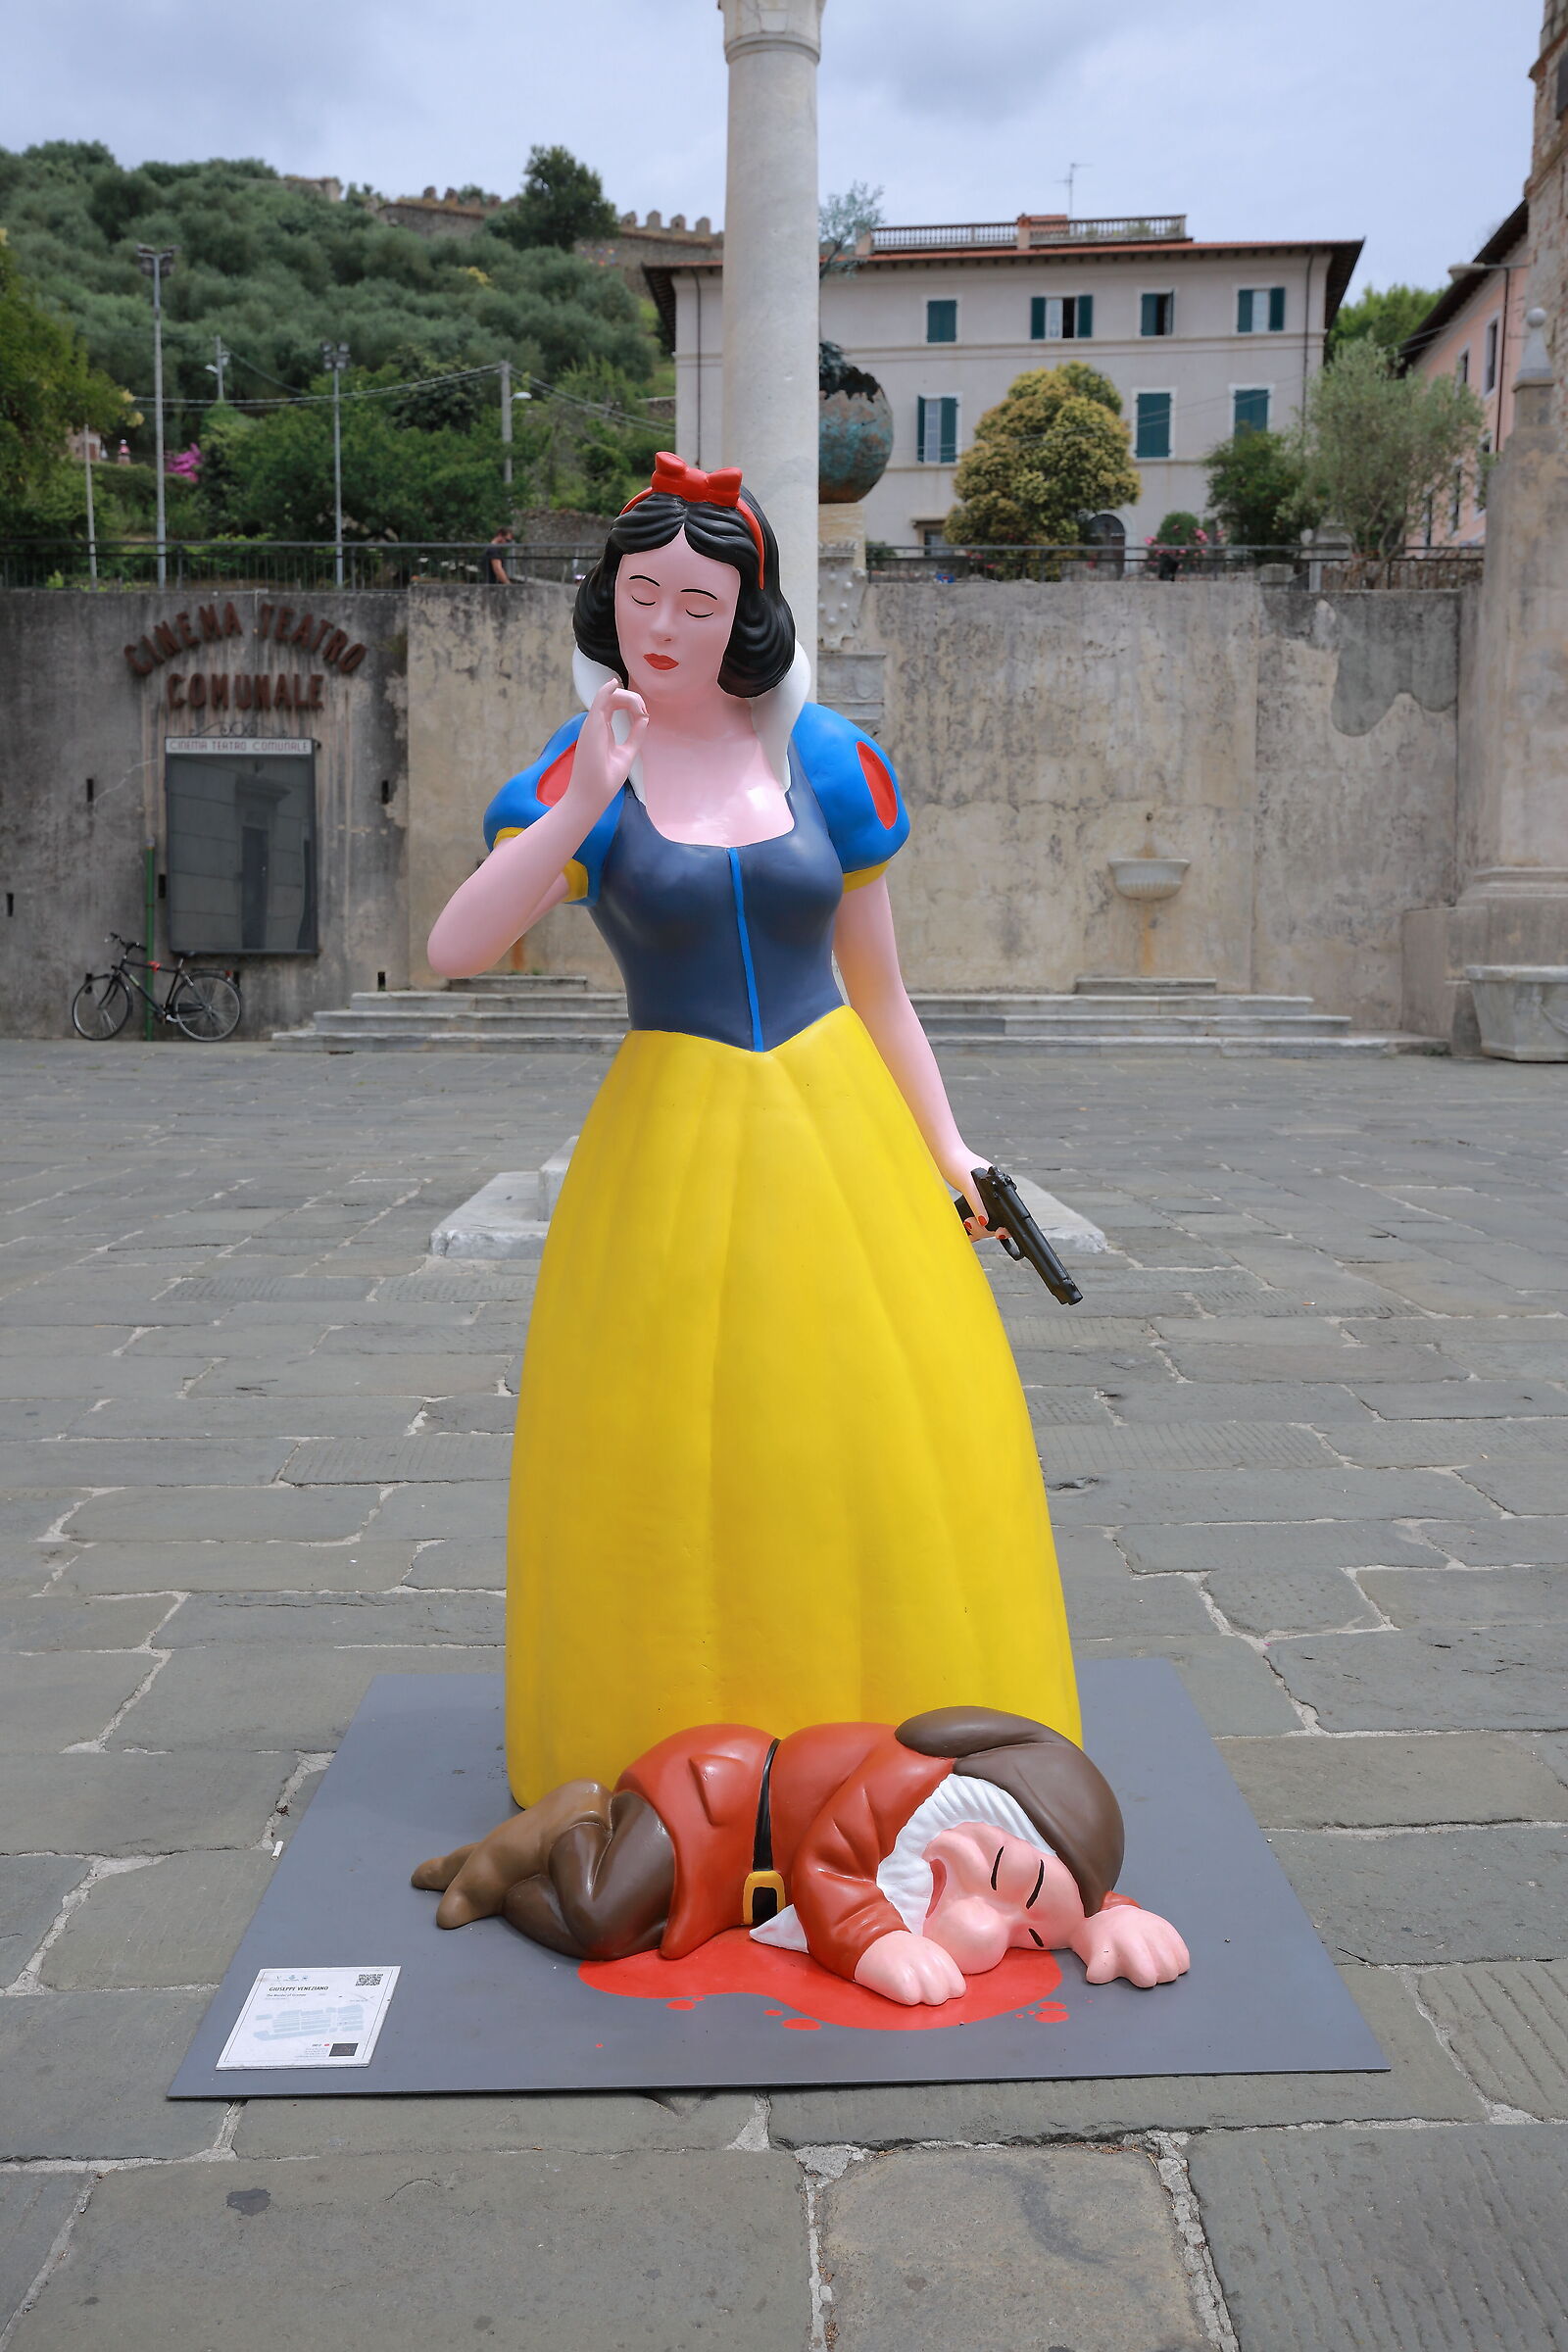 Snow White and the Seven Dwarfs, the Massacre of the Innocents...